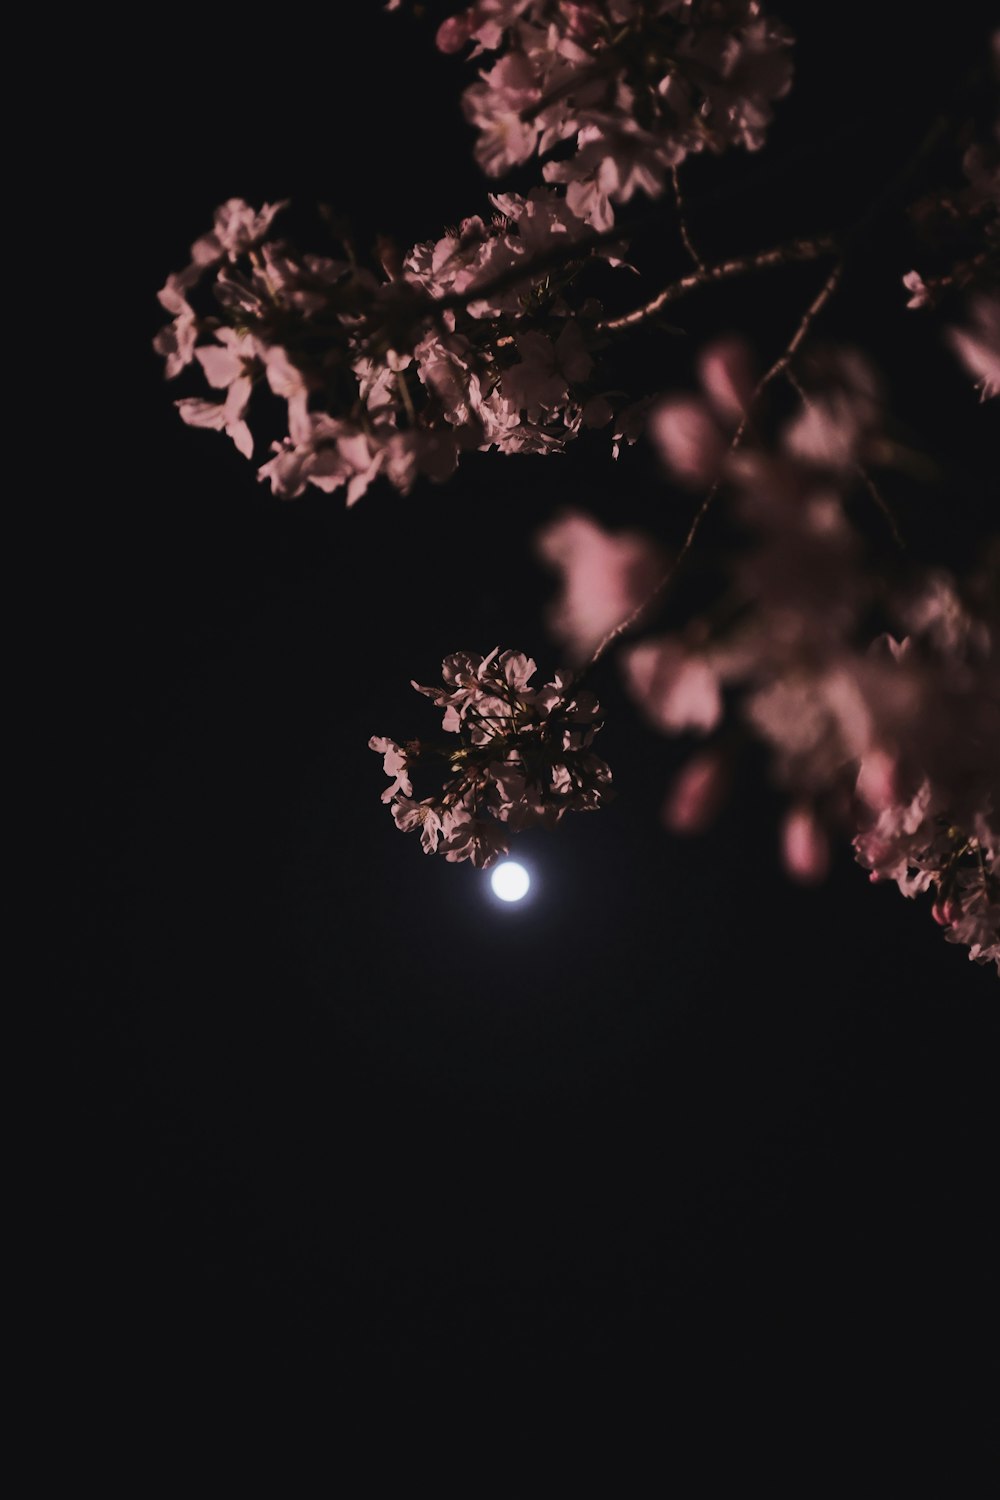 1000+ Night Flower Pictures | Download Free Images on Unsplash